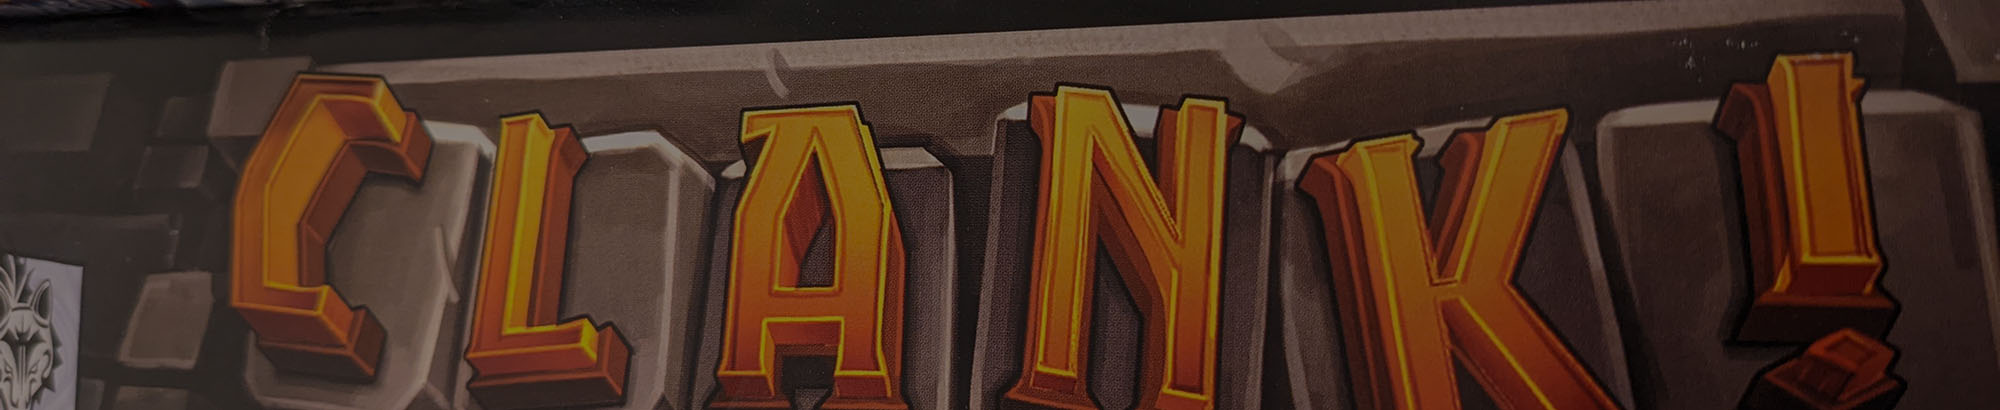 banner showing an up close view of the side of a board game box on a shelf